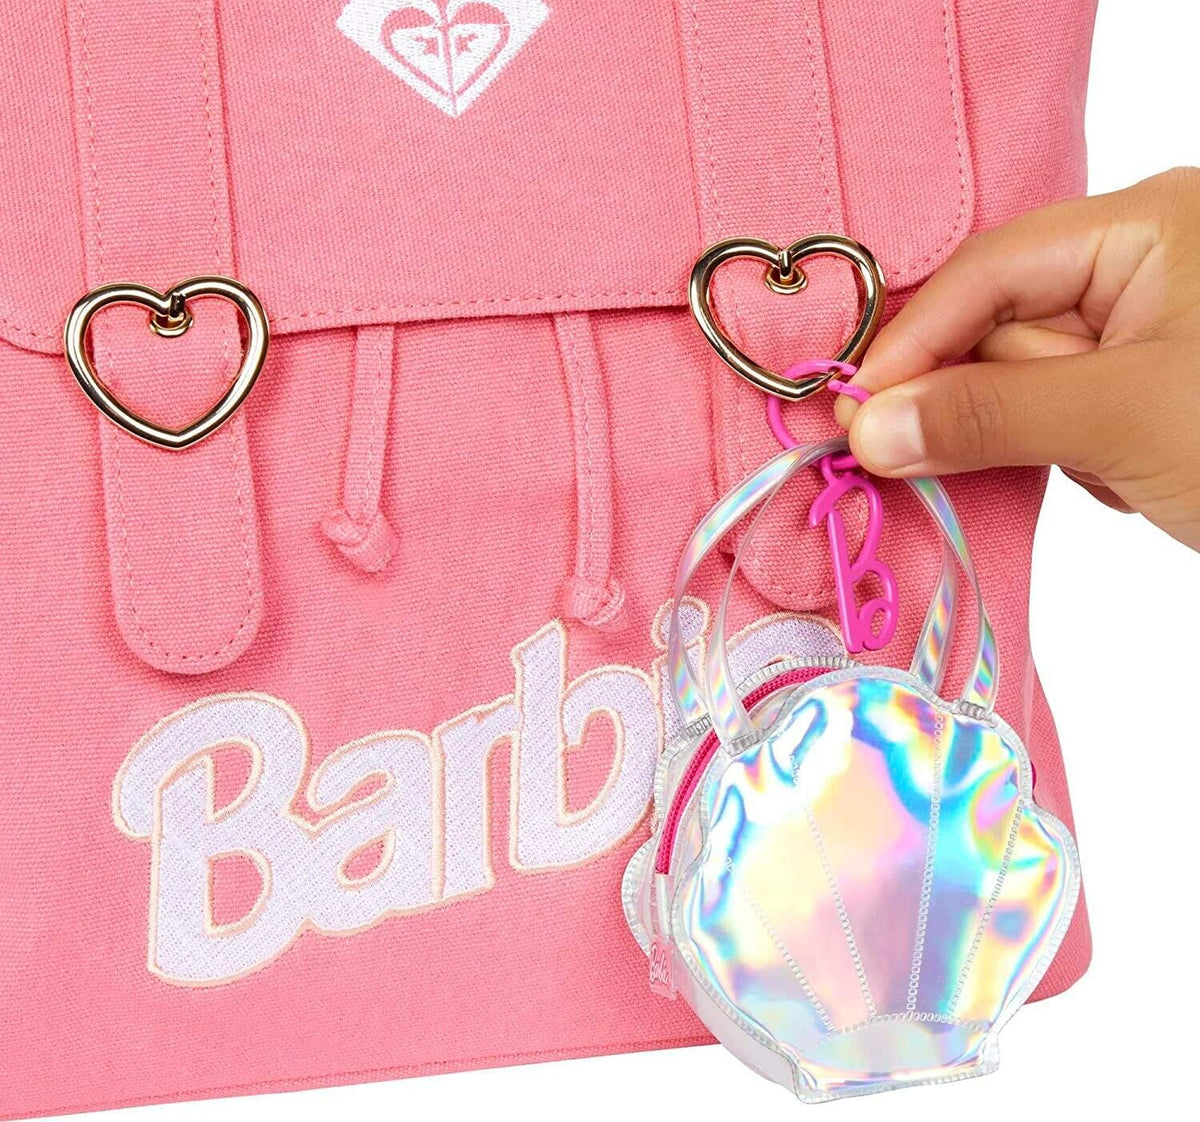 BARBIE FASHION ACCESSORIES - BEACH OUTFIT AND BAG WITH 5 SURPRISES